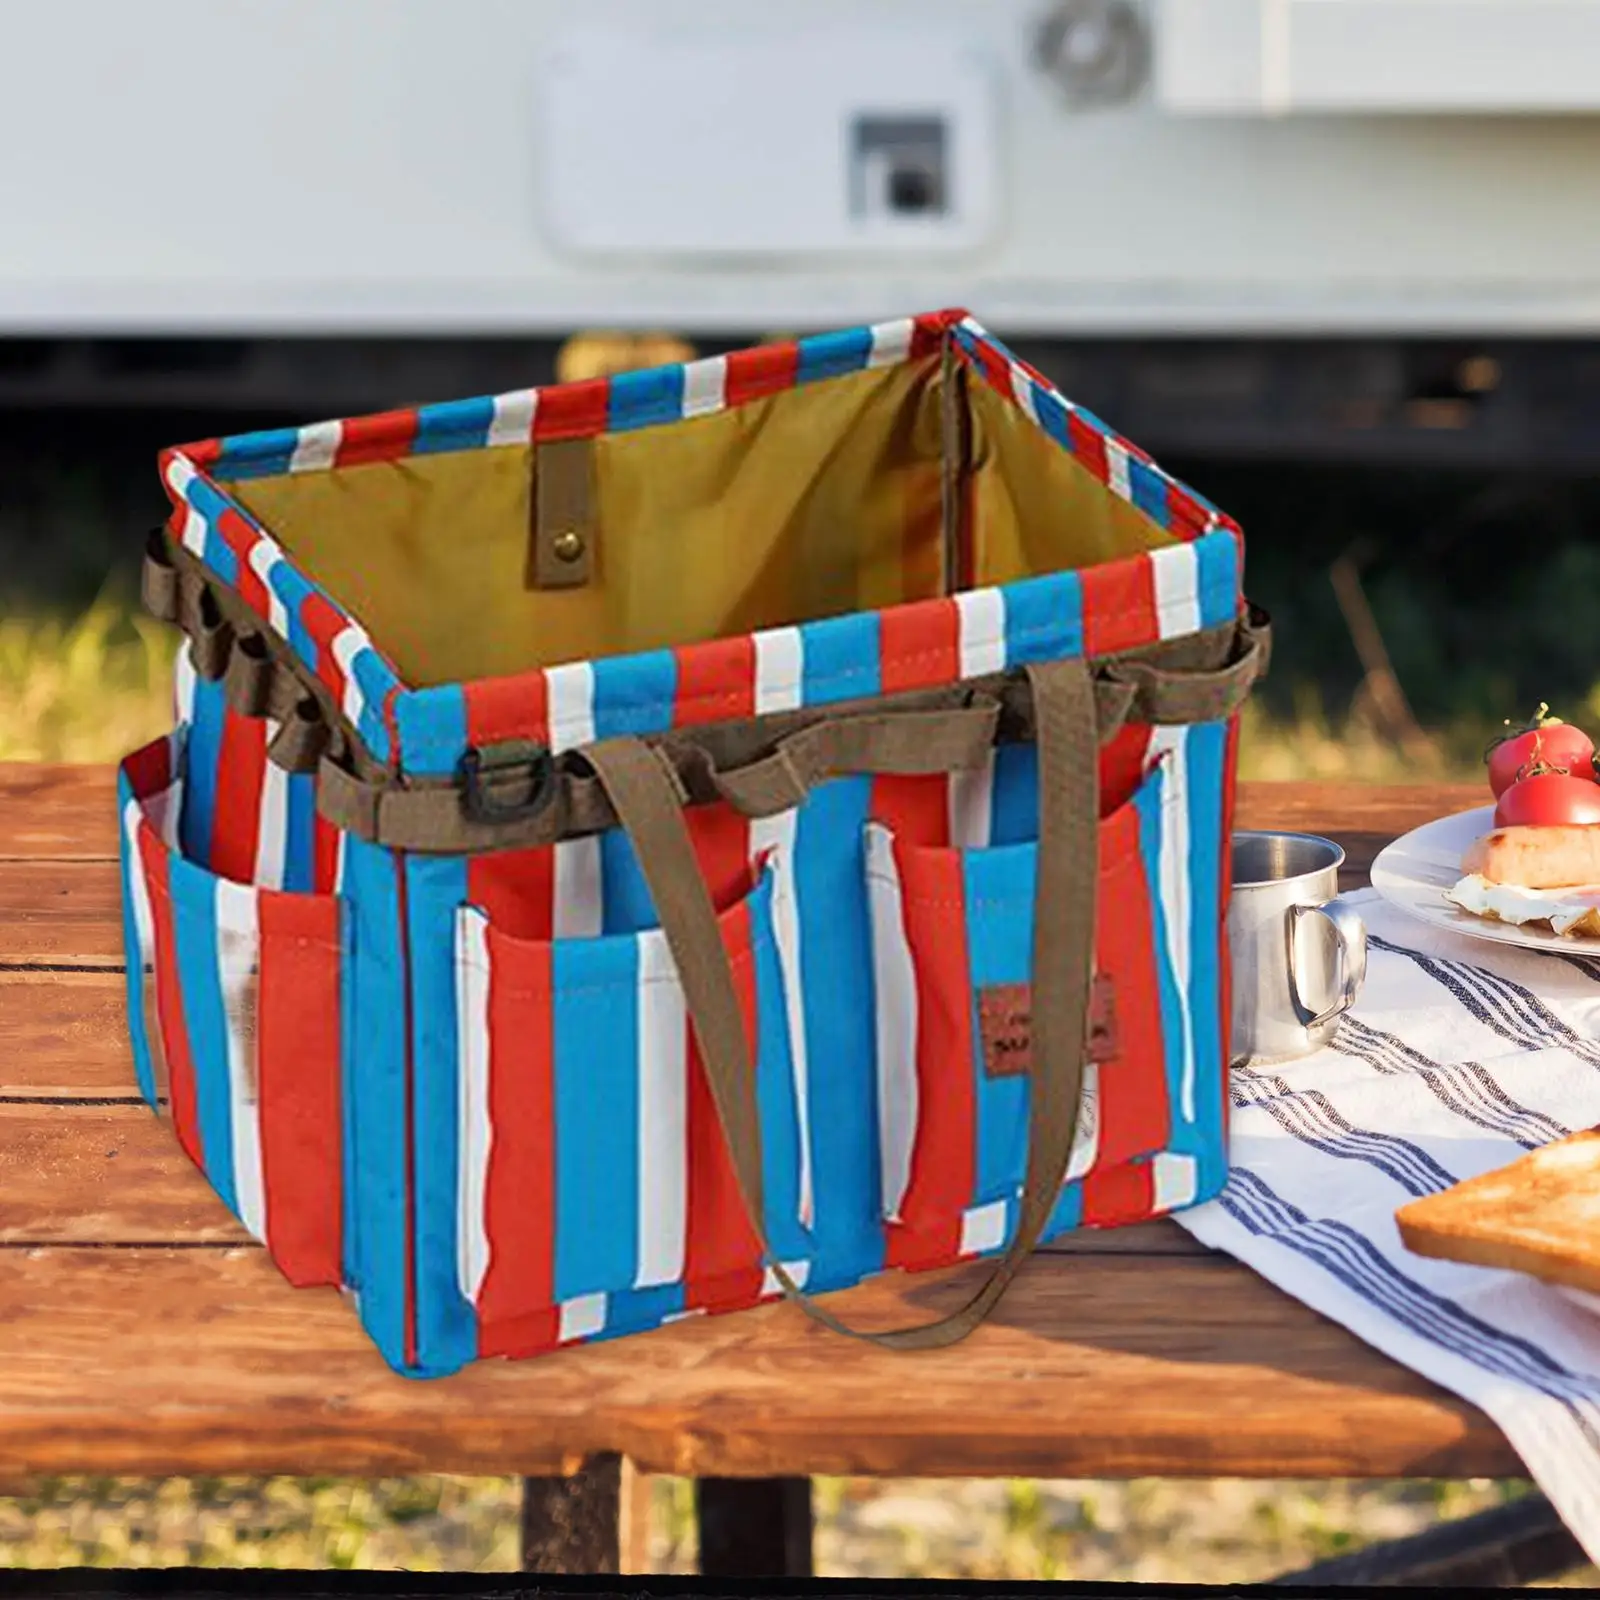 Utility Tote Tool Organizer Household Outdoor Basket BBQ Camping Storage Bag